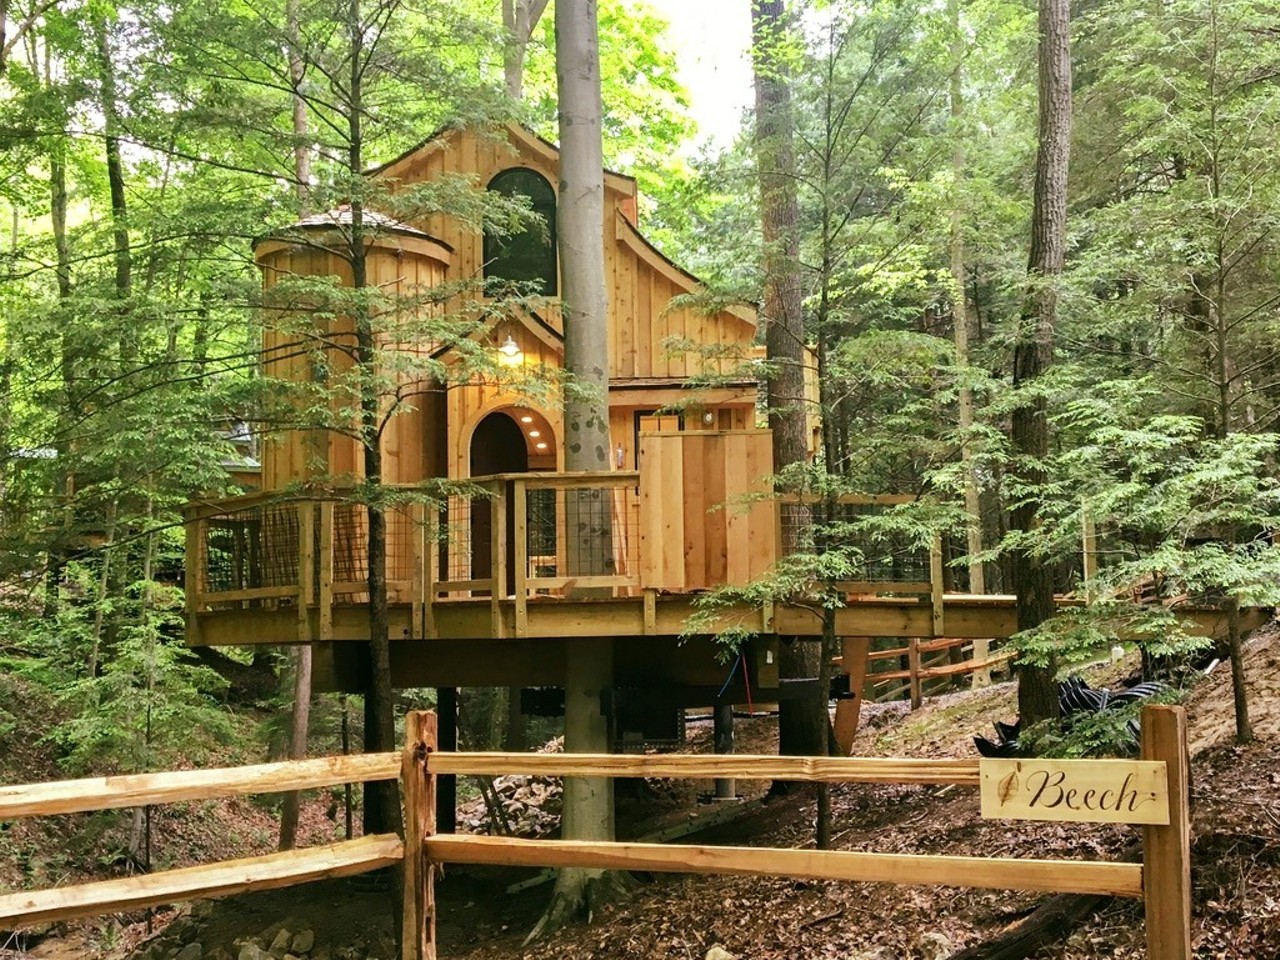  Hocking Hills Treehouse Cabins
22784 Purcell Rd., South Bloomingville
Another group of treehouses located in the Hocking Hills, these three treehouses are all unique and awesome. Old Man&#146;s Cave, the Buckeye Trail and other popular outdoor attractions are also very close by.
Photo via Hocking Hills Treehouse Cabins/Facebook